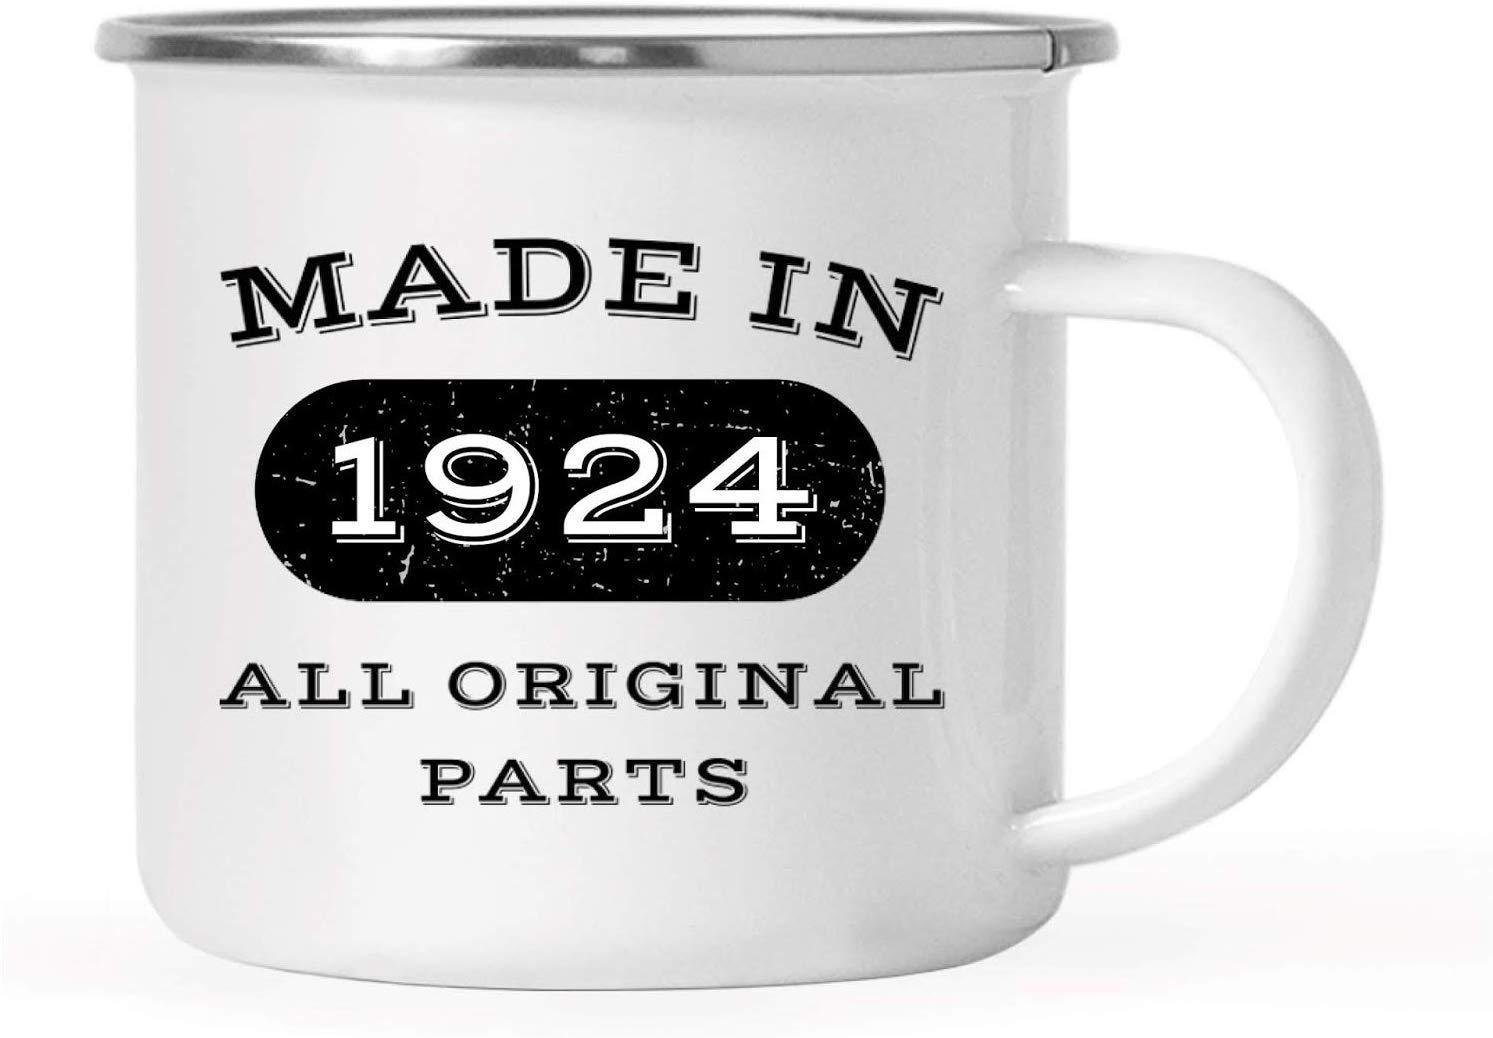 Stainless Steel Birthday Campfire Coffee Mug Gift, Made in 1924 All Original Parts-Set of 1-Andaz Press-